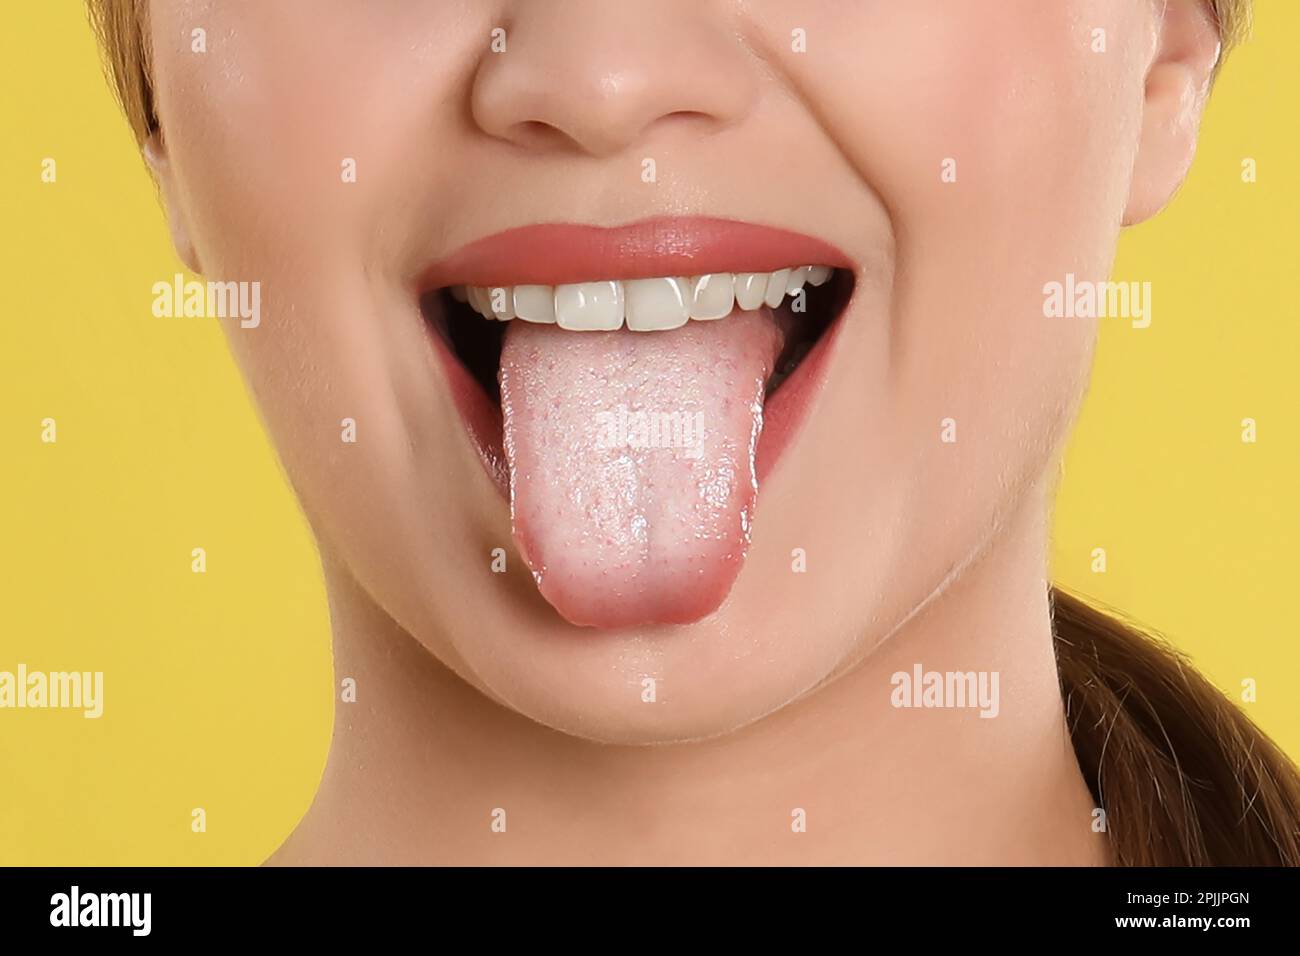 Young woman showing tongue with white patches on yellow background, closeup. Oral candidiasis (thrush) disease Stock Photo